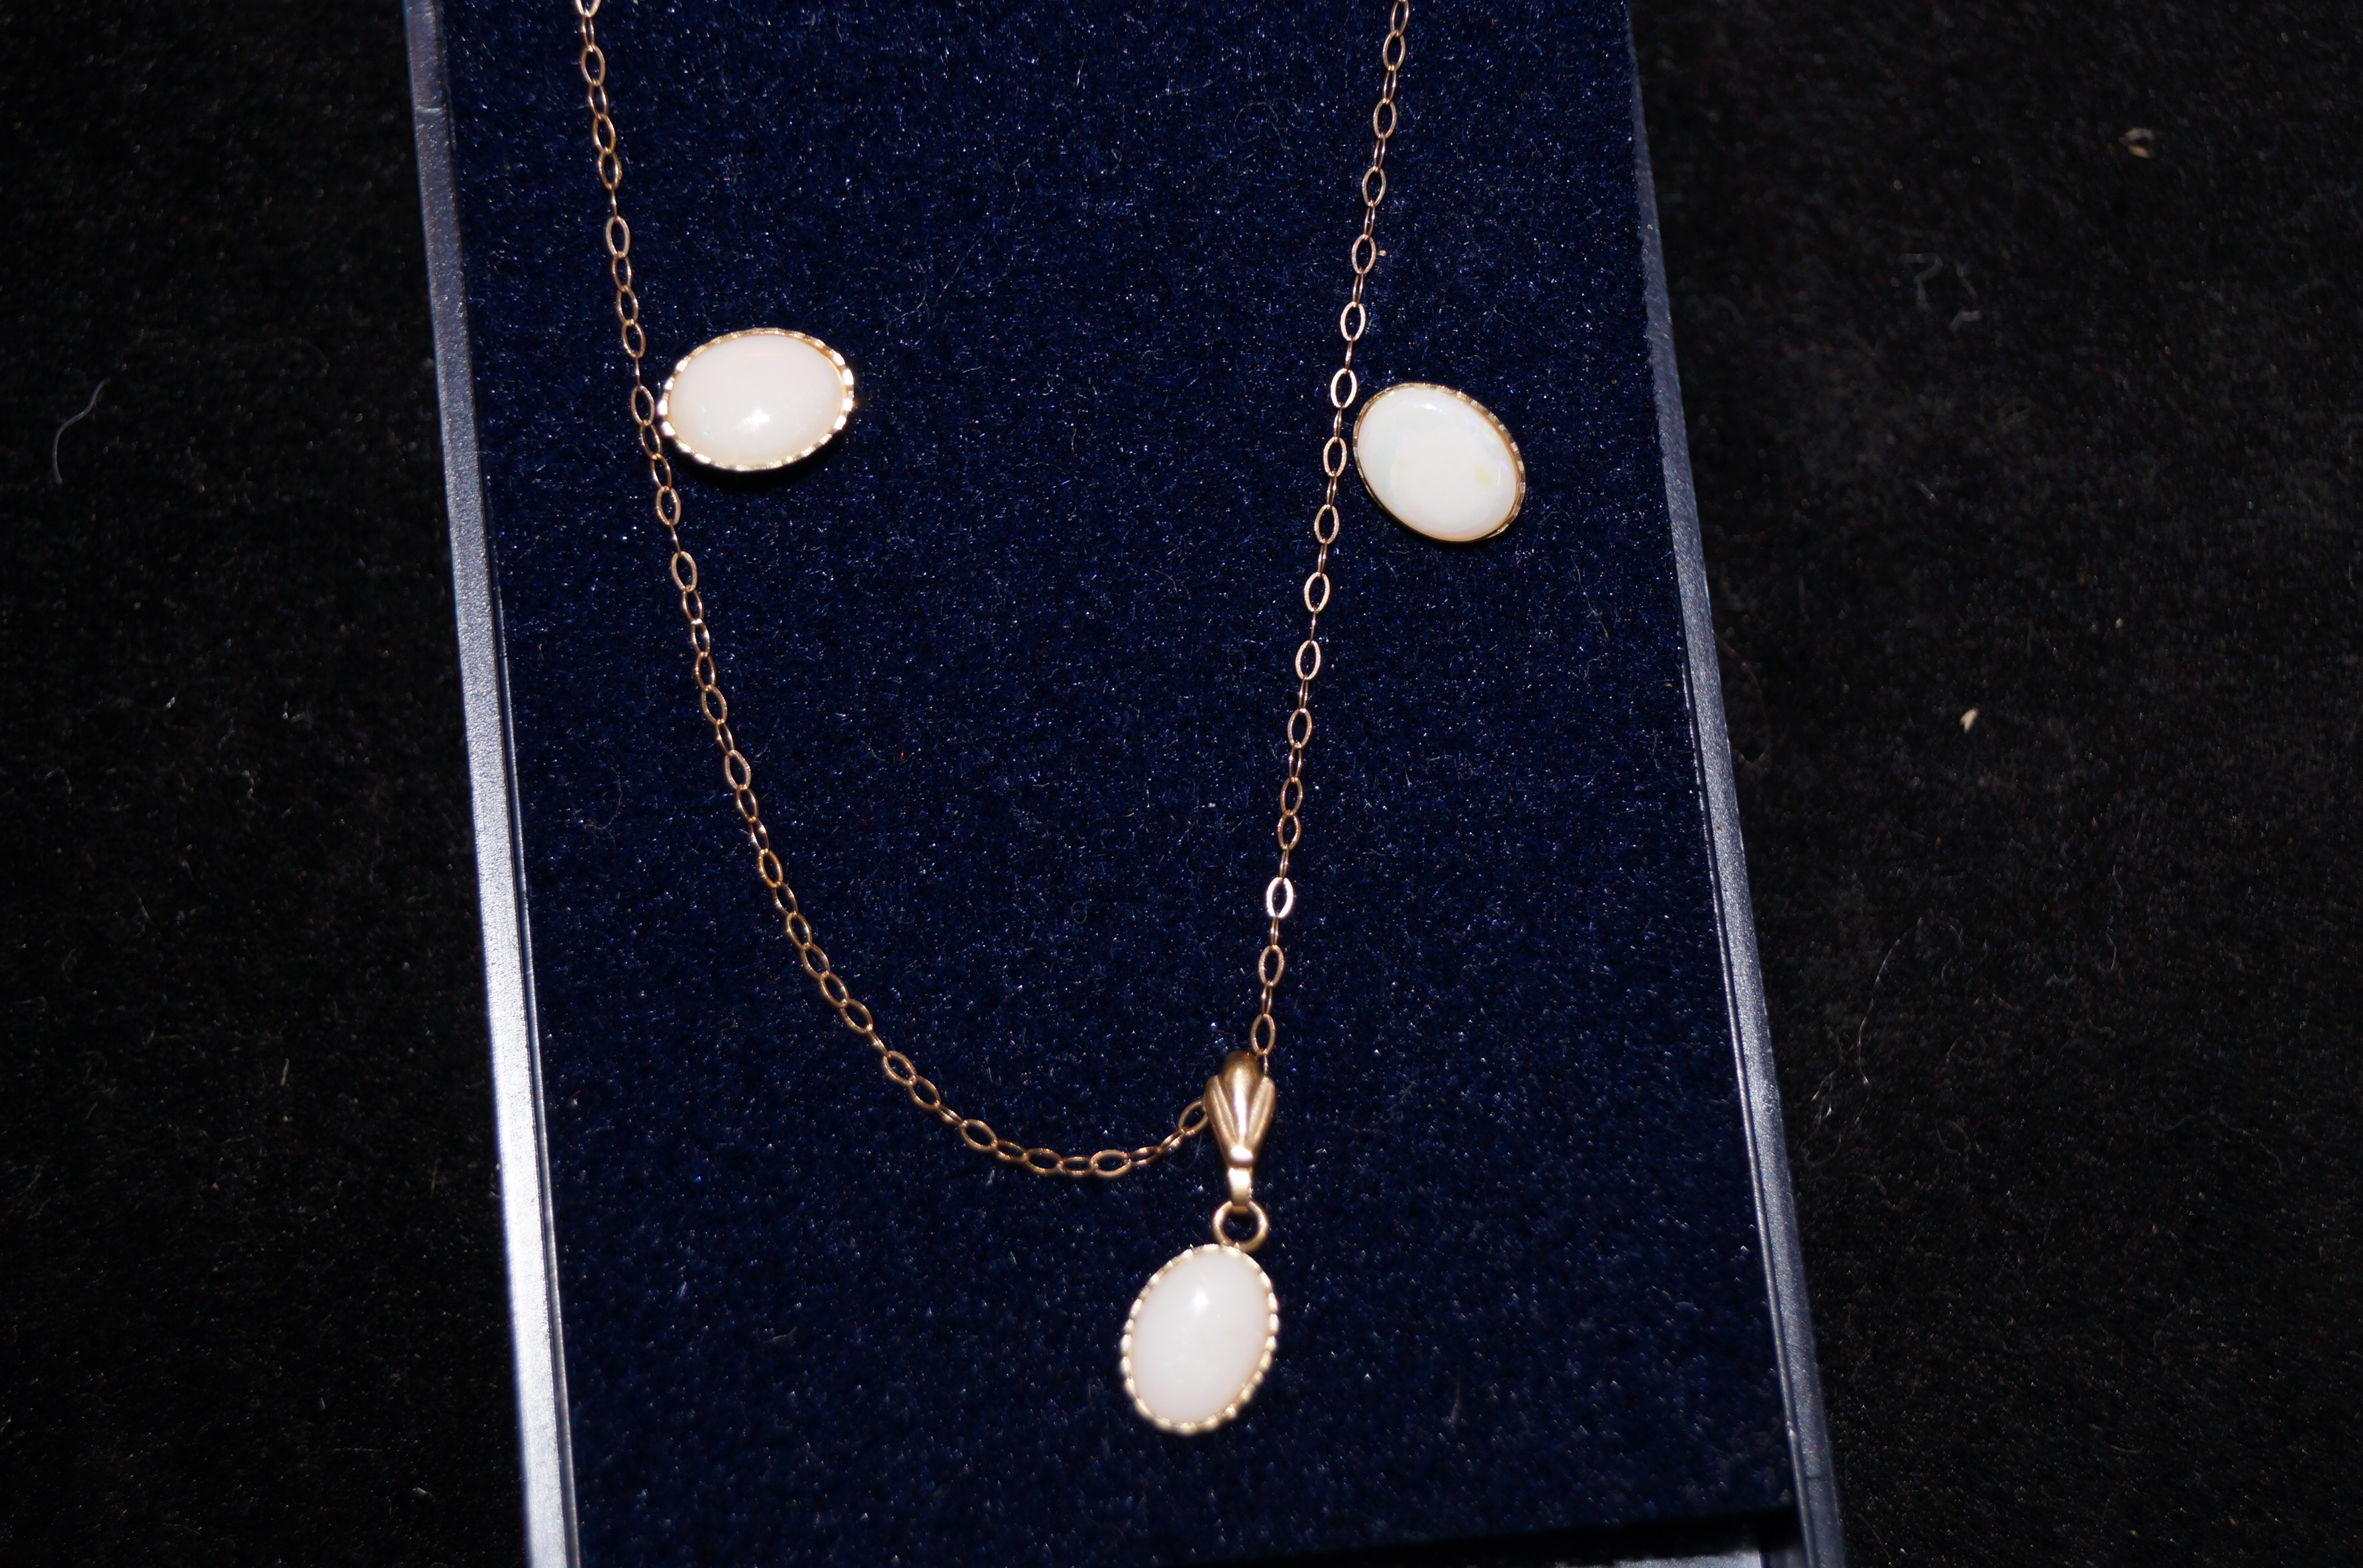 9ct gold chain pendent and earring set